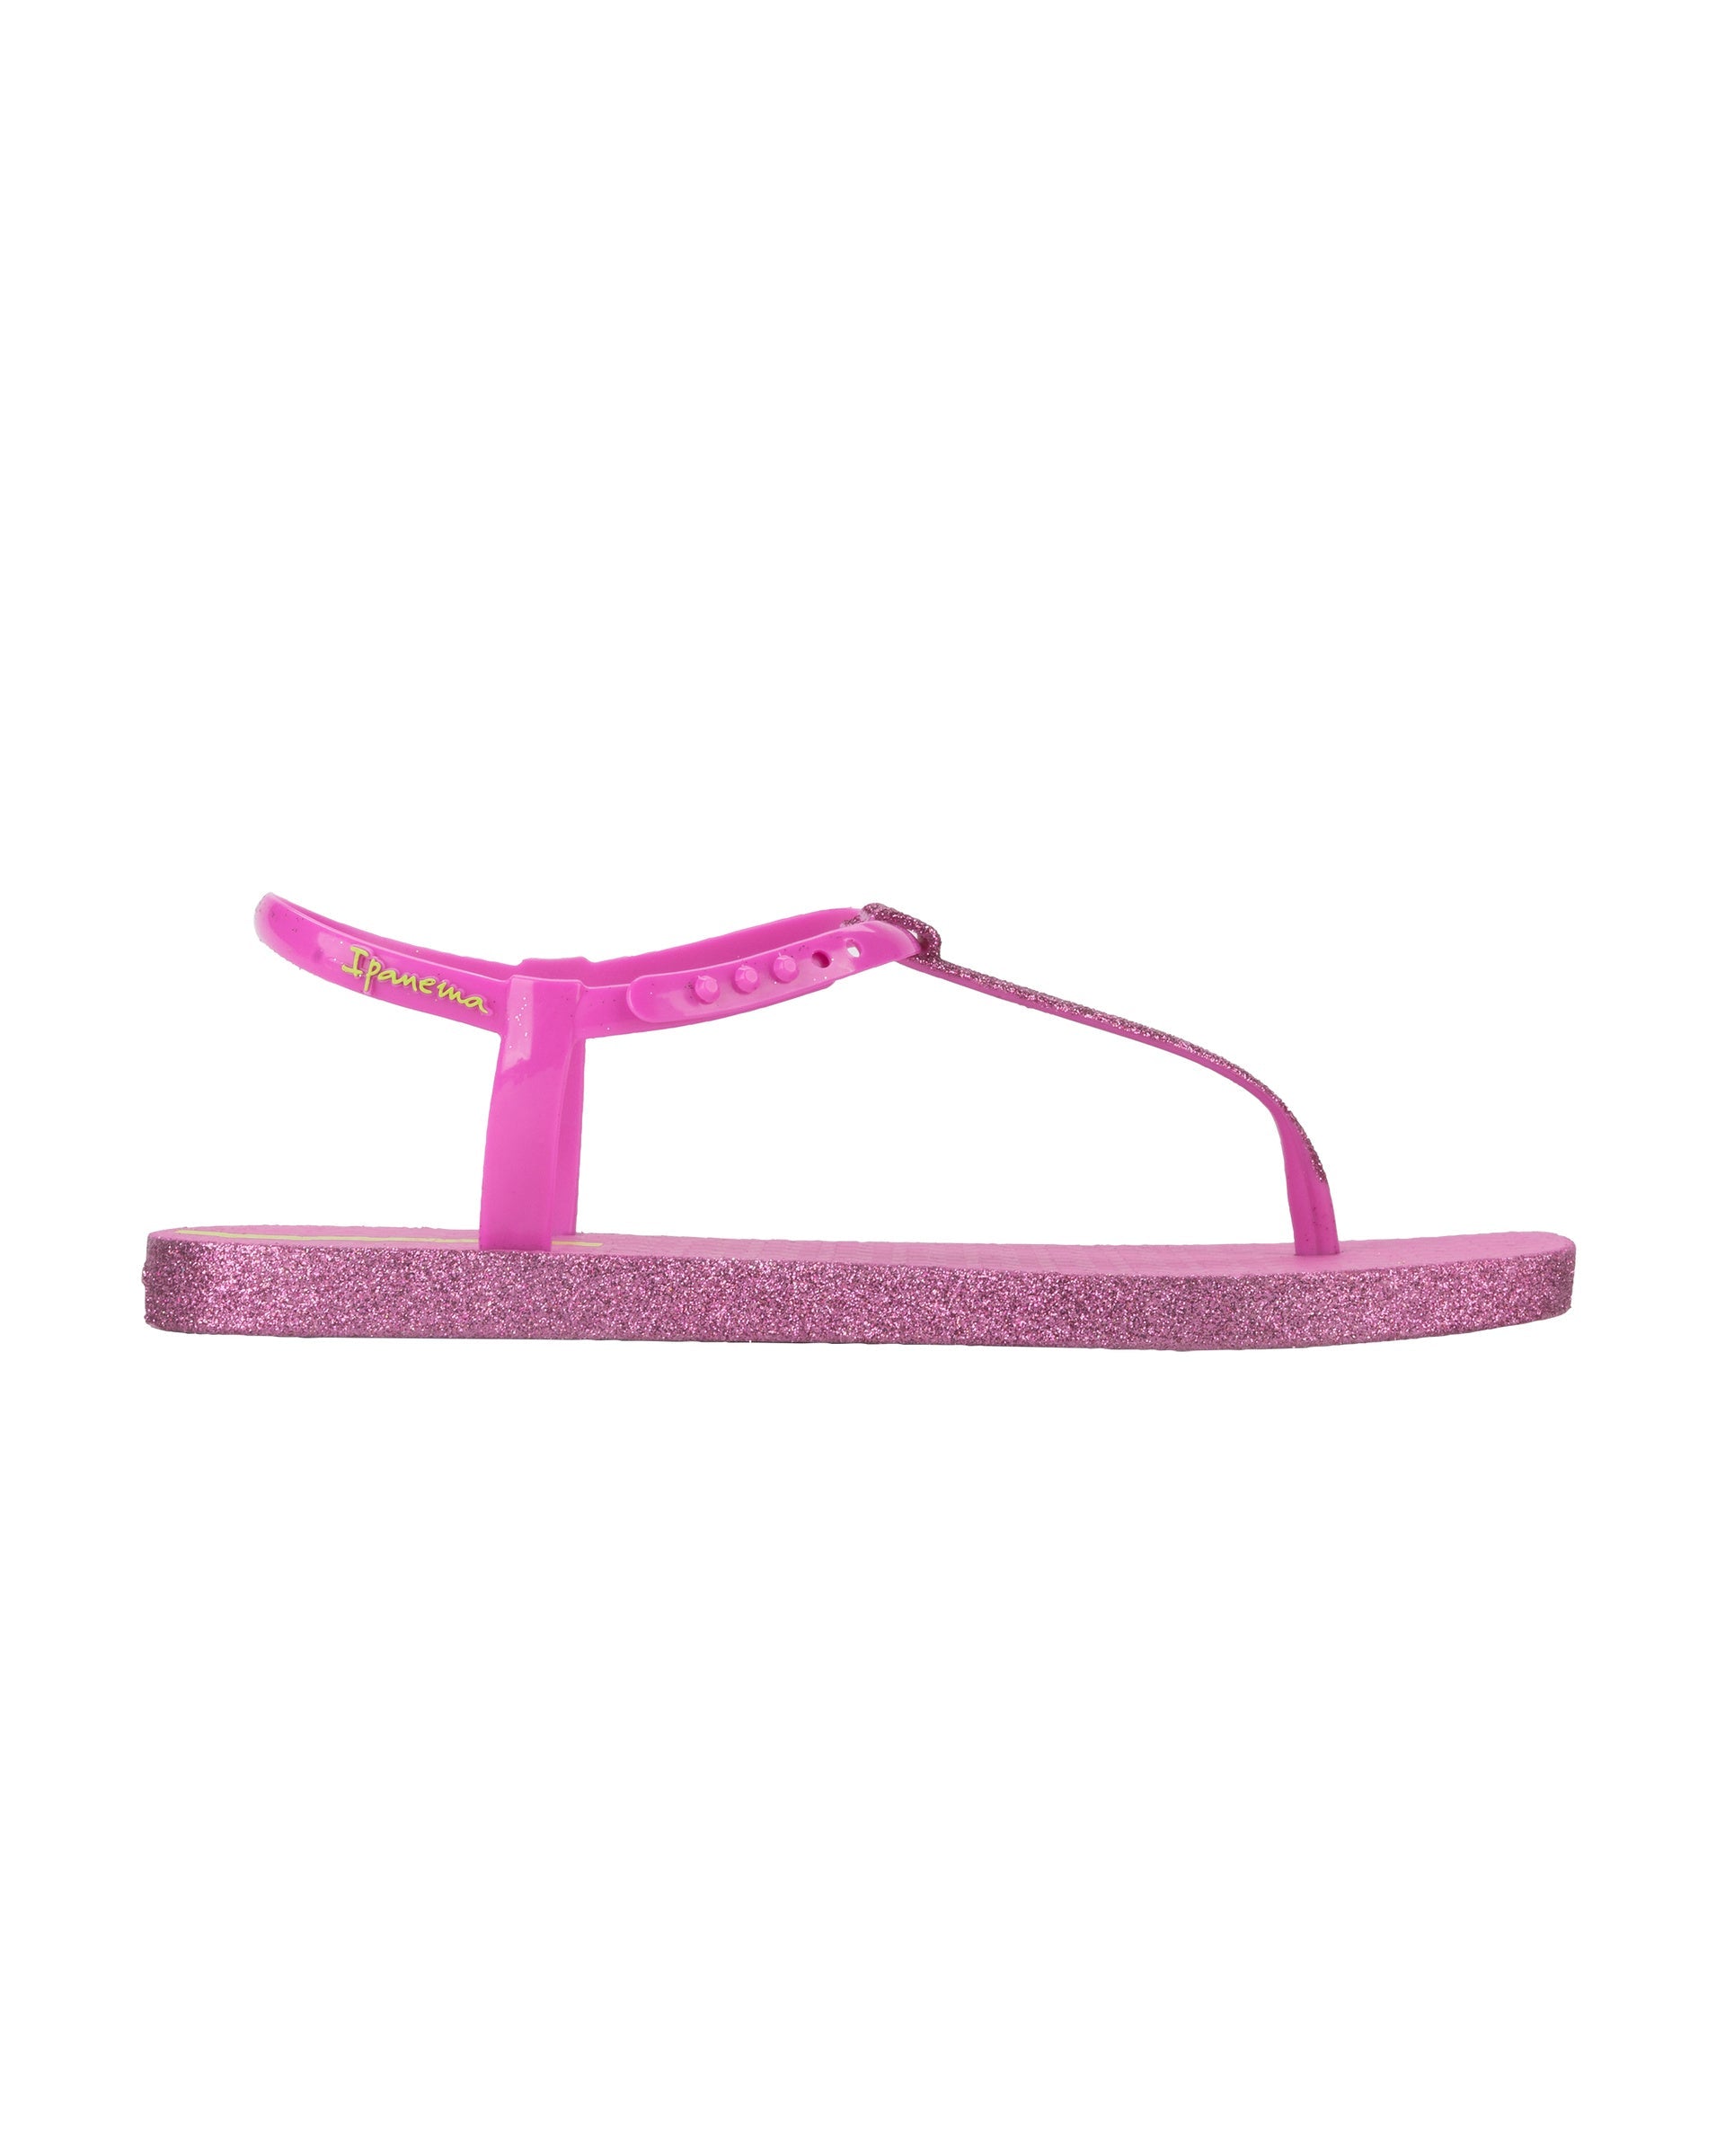 Outer side view of a pink Ipanema Class Edge Glow t-strap women's sandal with glitter pink thong.